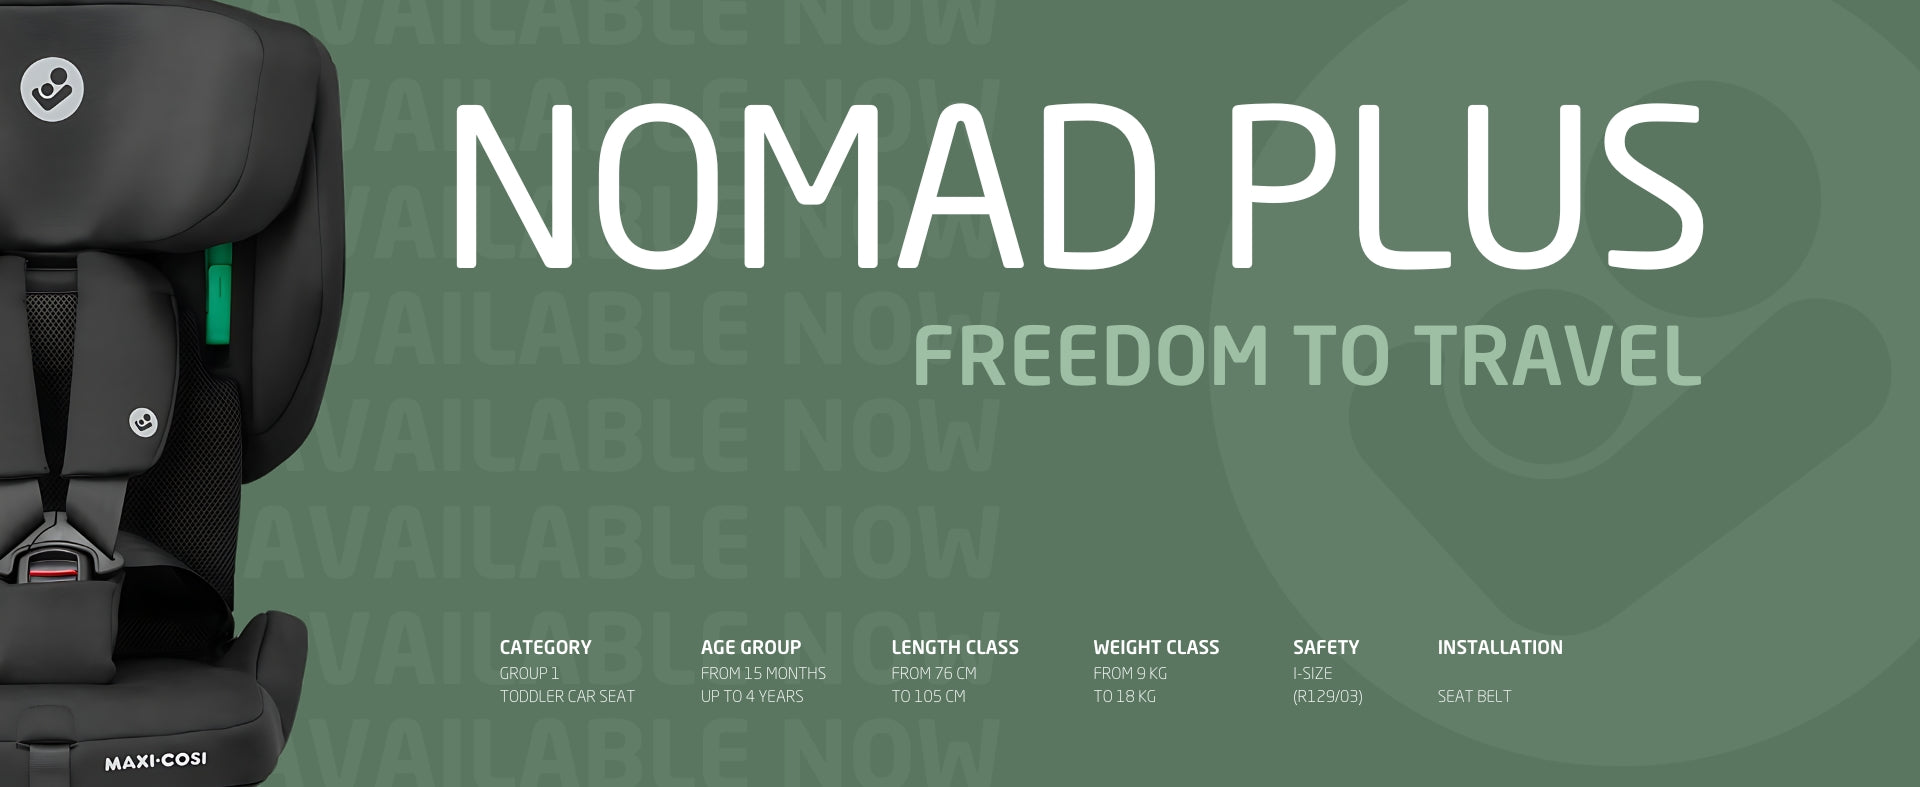 Green Website Banner for Maxi-Cosi Nomad Plus Car Seat